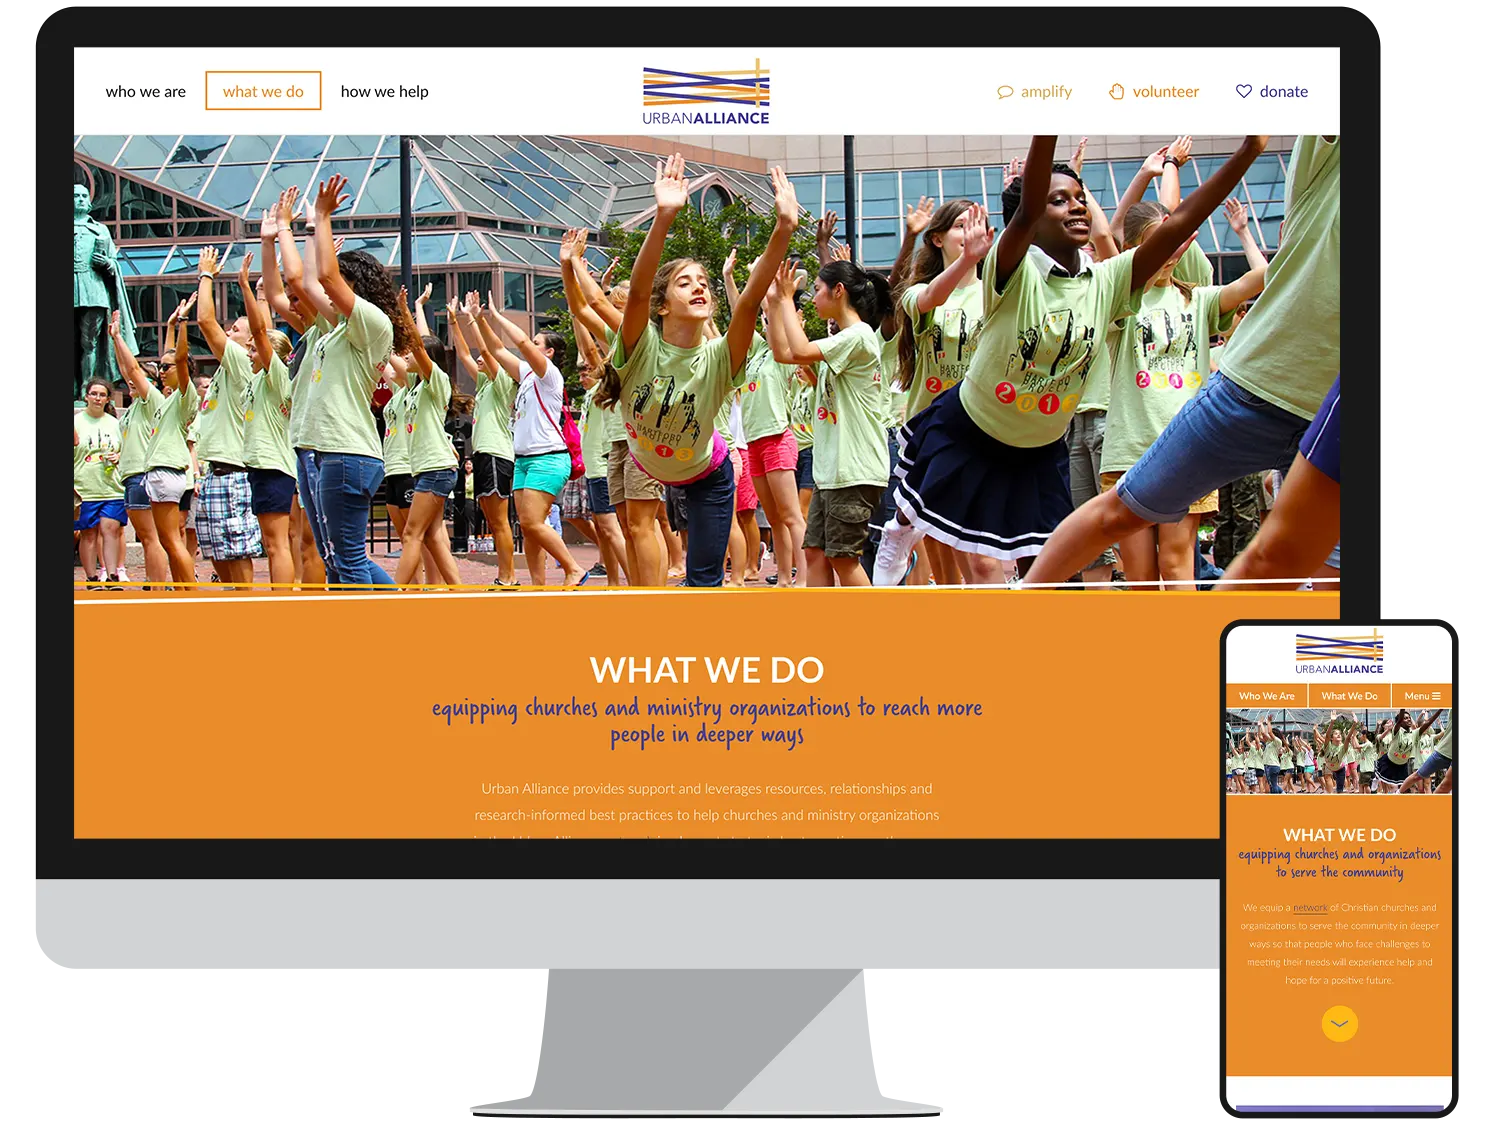 Urban Alliance Landing Page - What We Do